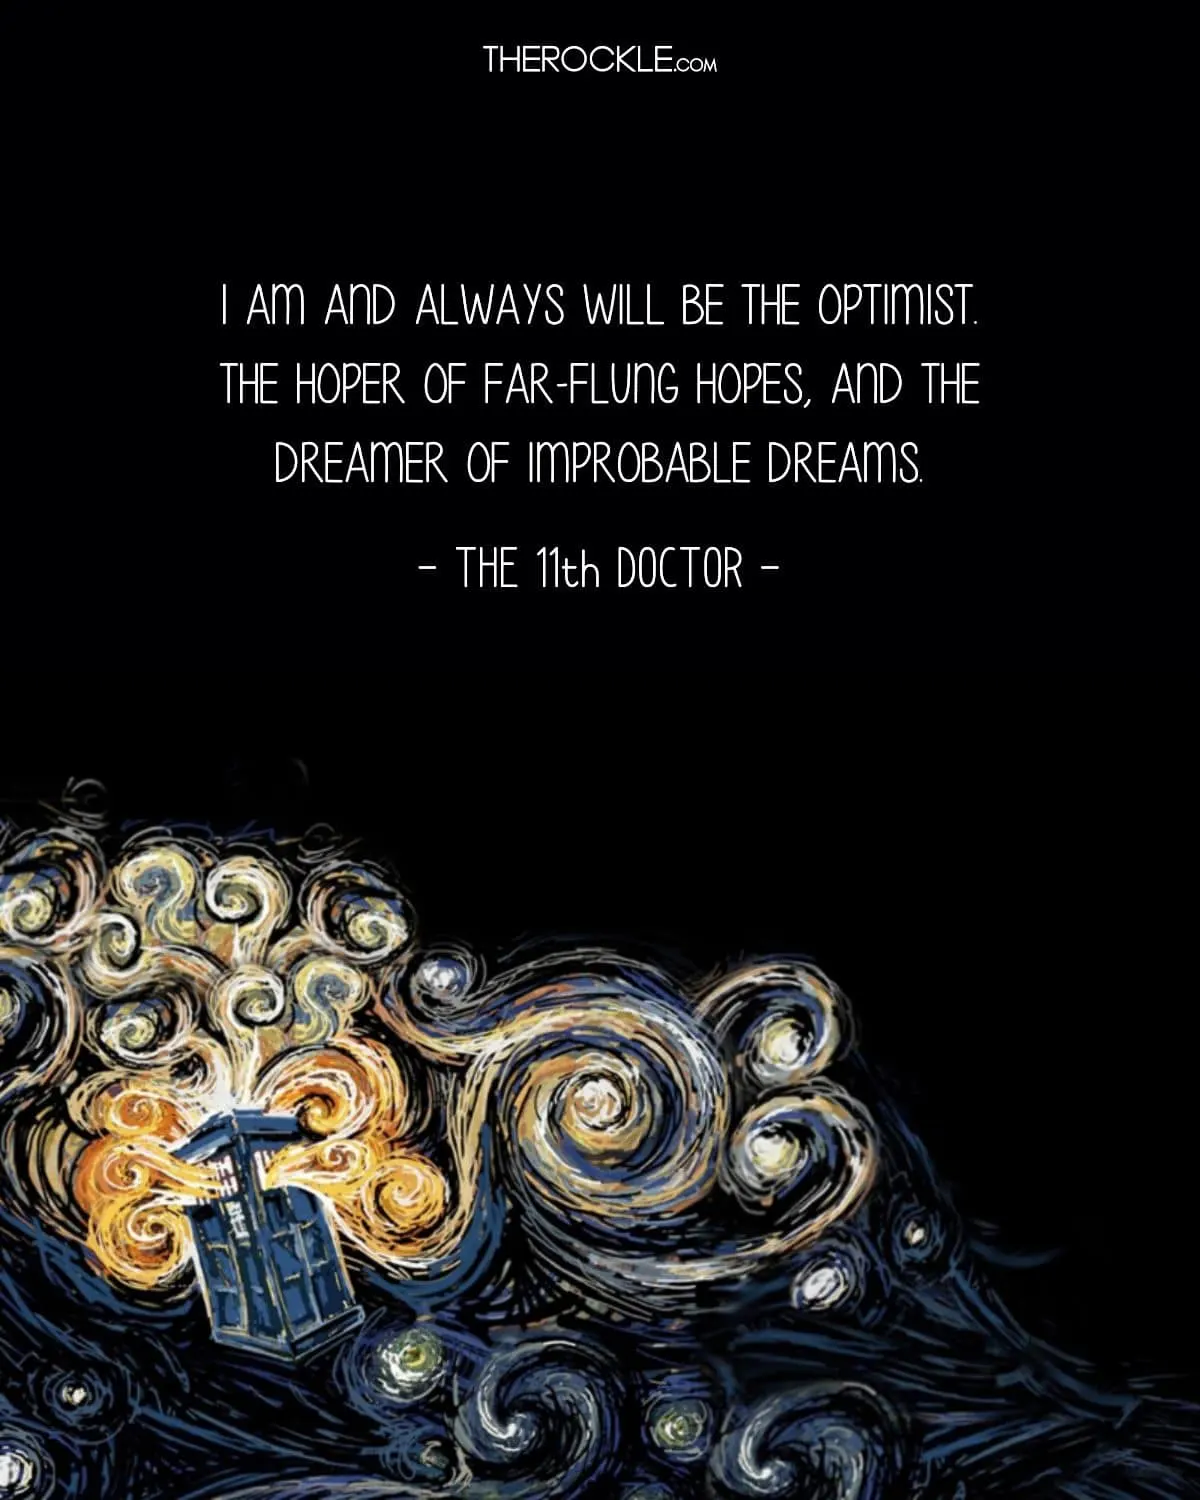 Doctor Who quote about optimism and dreams